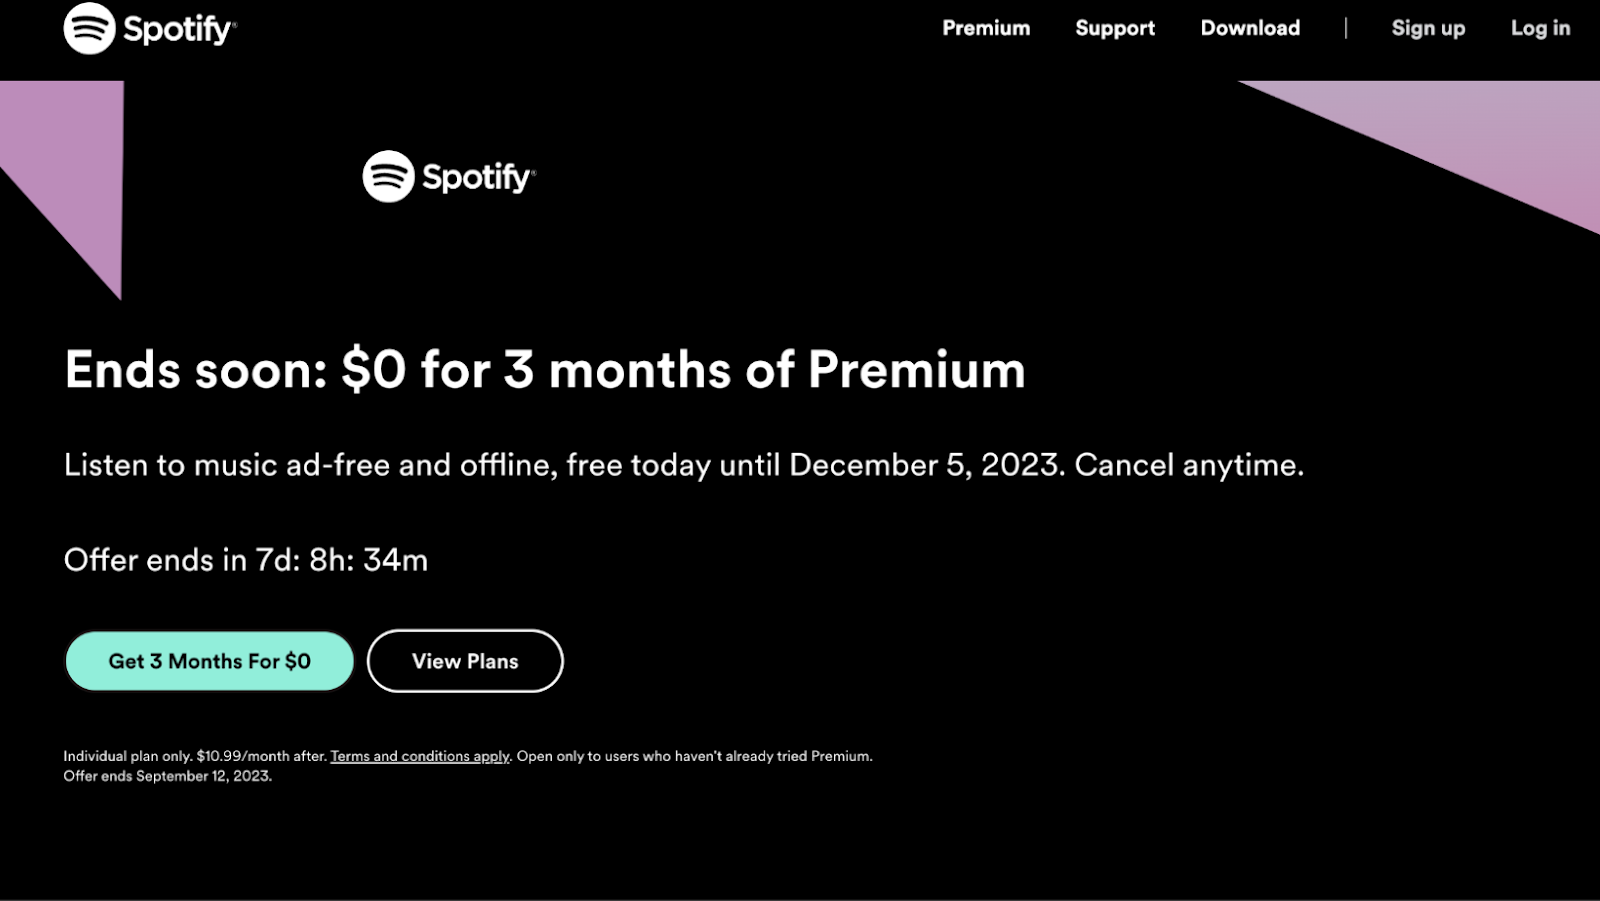 Spotify's free trial for a premium service page